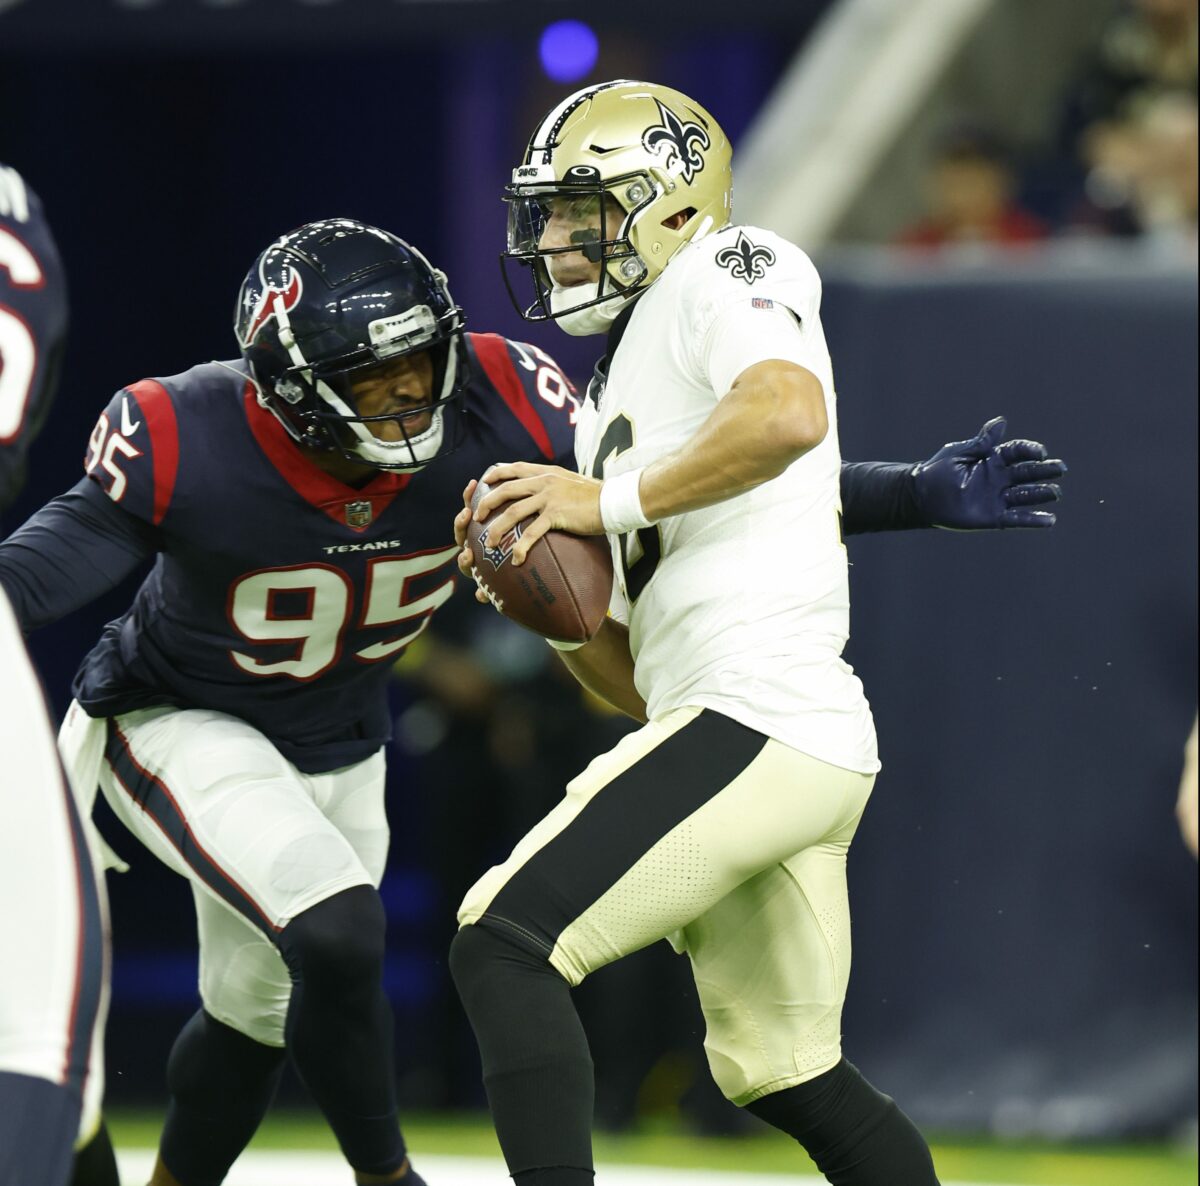 4 facts to remember about the Texans’ practice squad